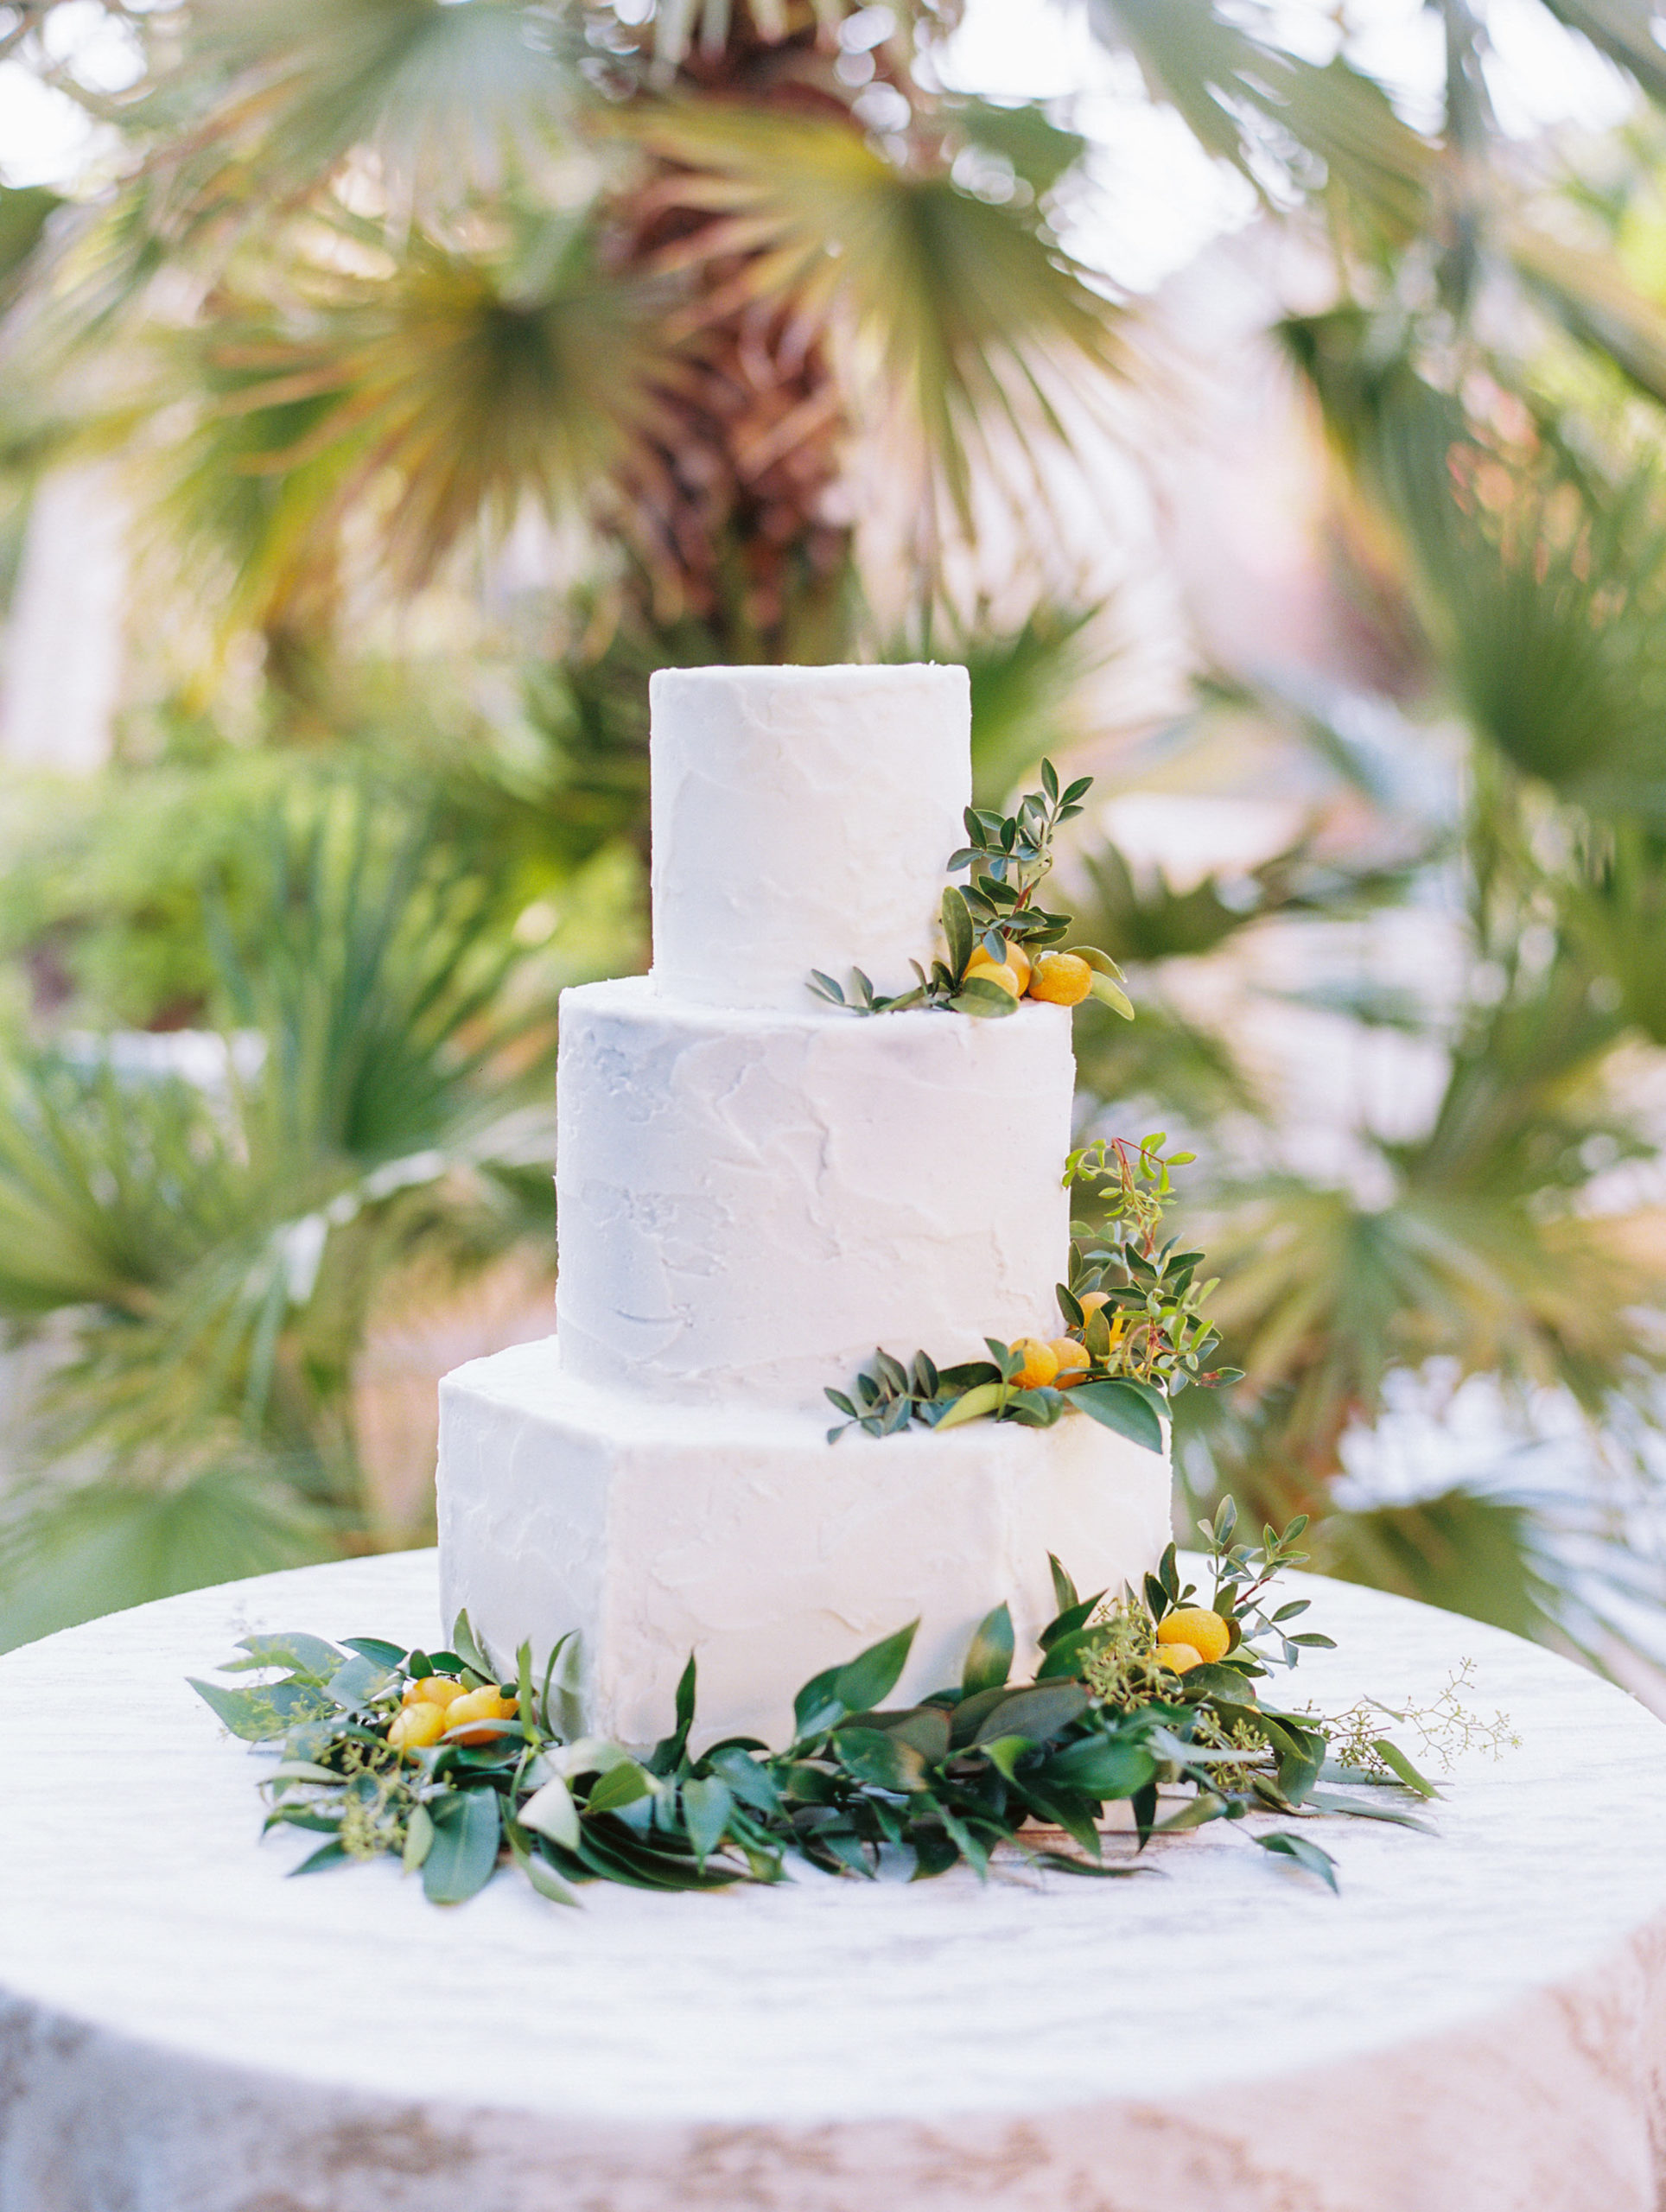 White geometric wedding cake by Phoenix area baker, Dessert First by Veronica. Floral by Array Design. Photography by Tasha Brady..